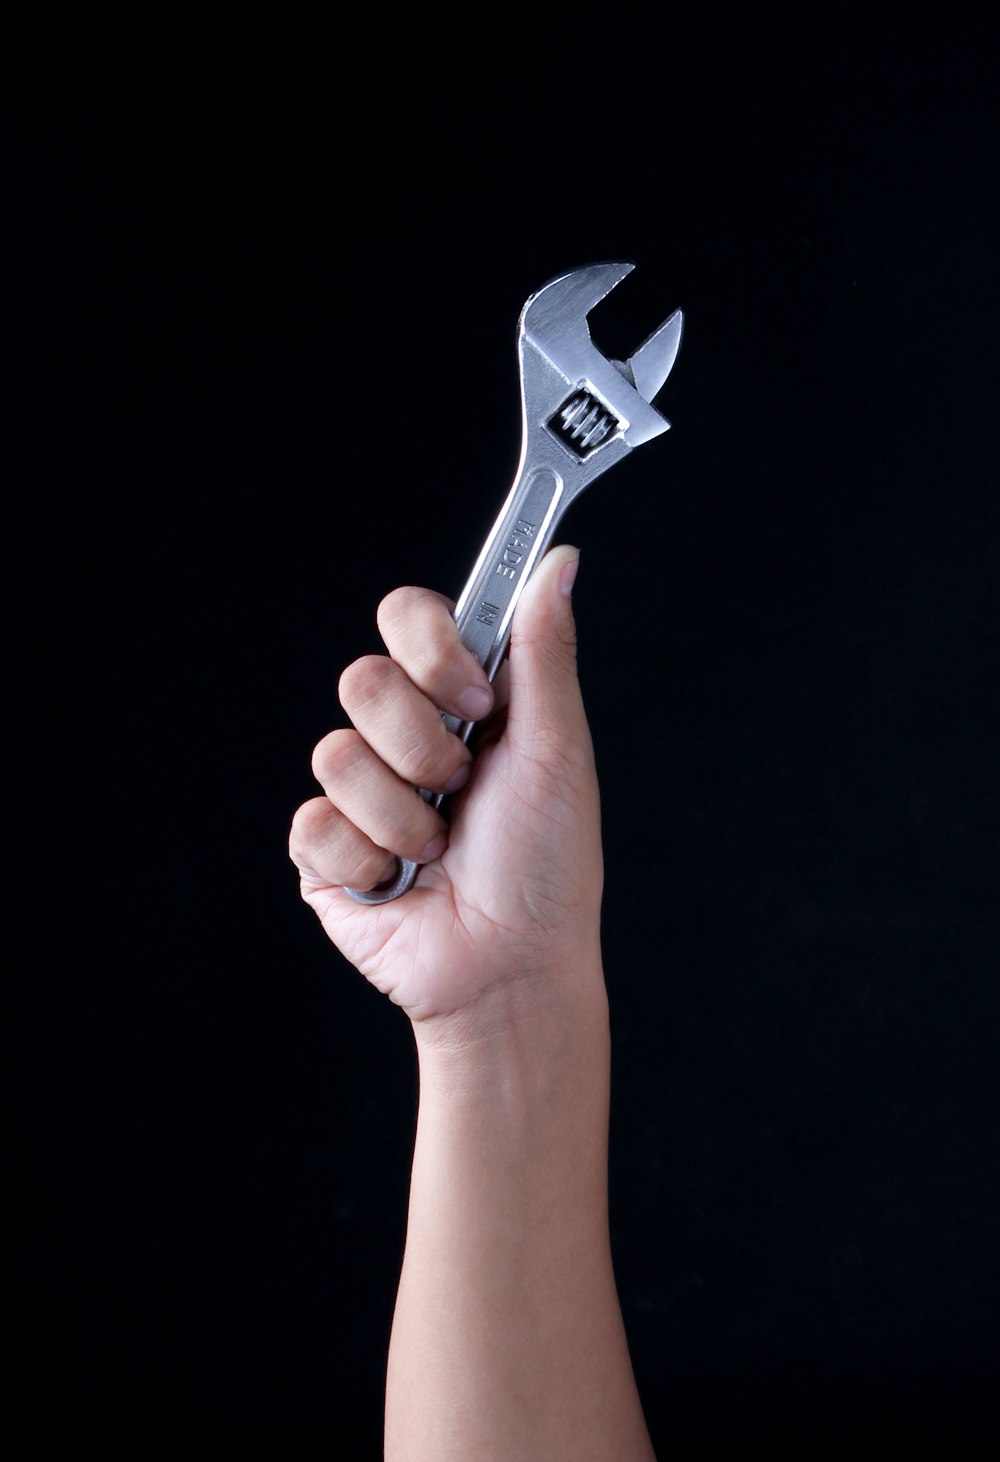 person holding gray and black metal tool